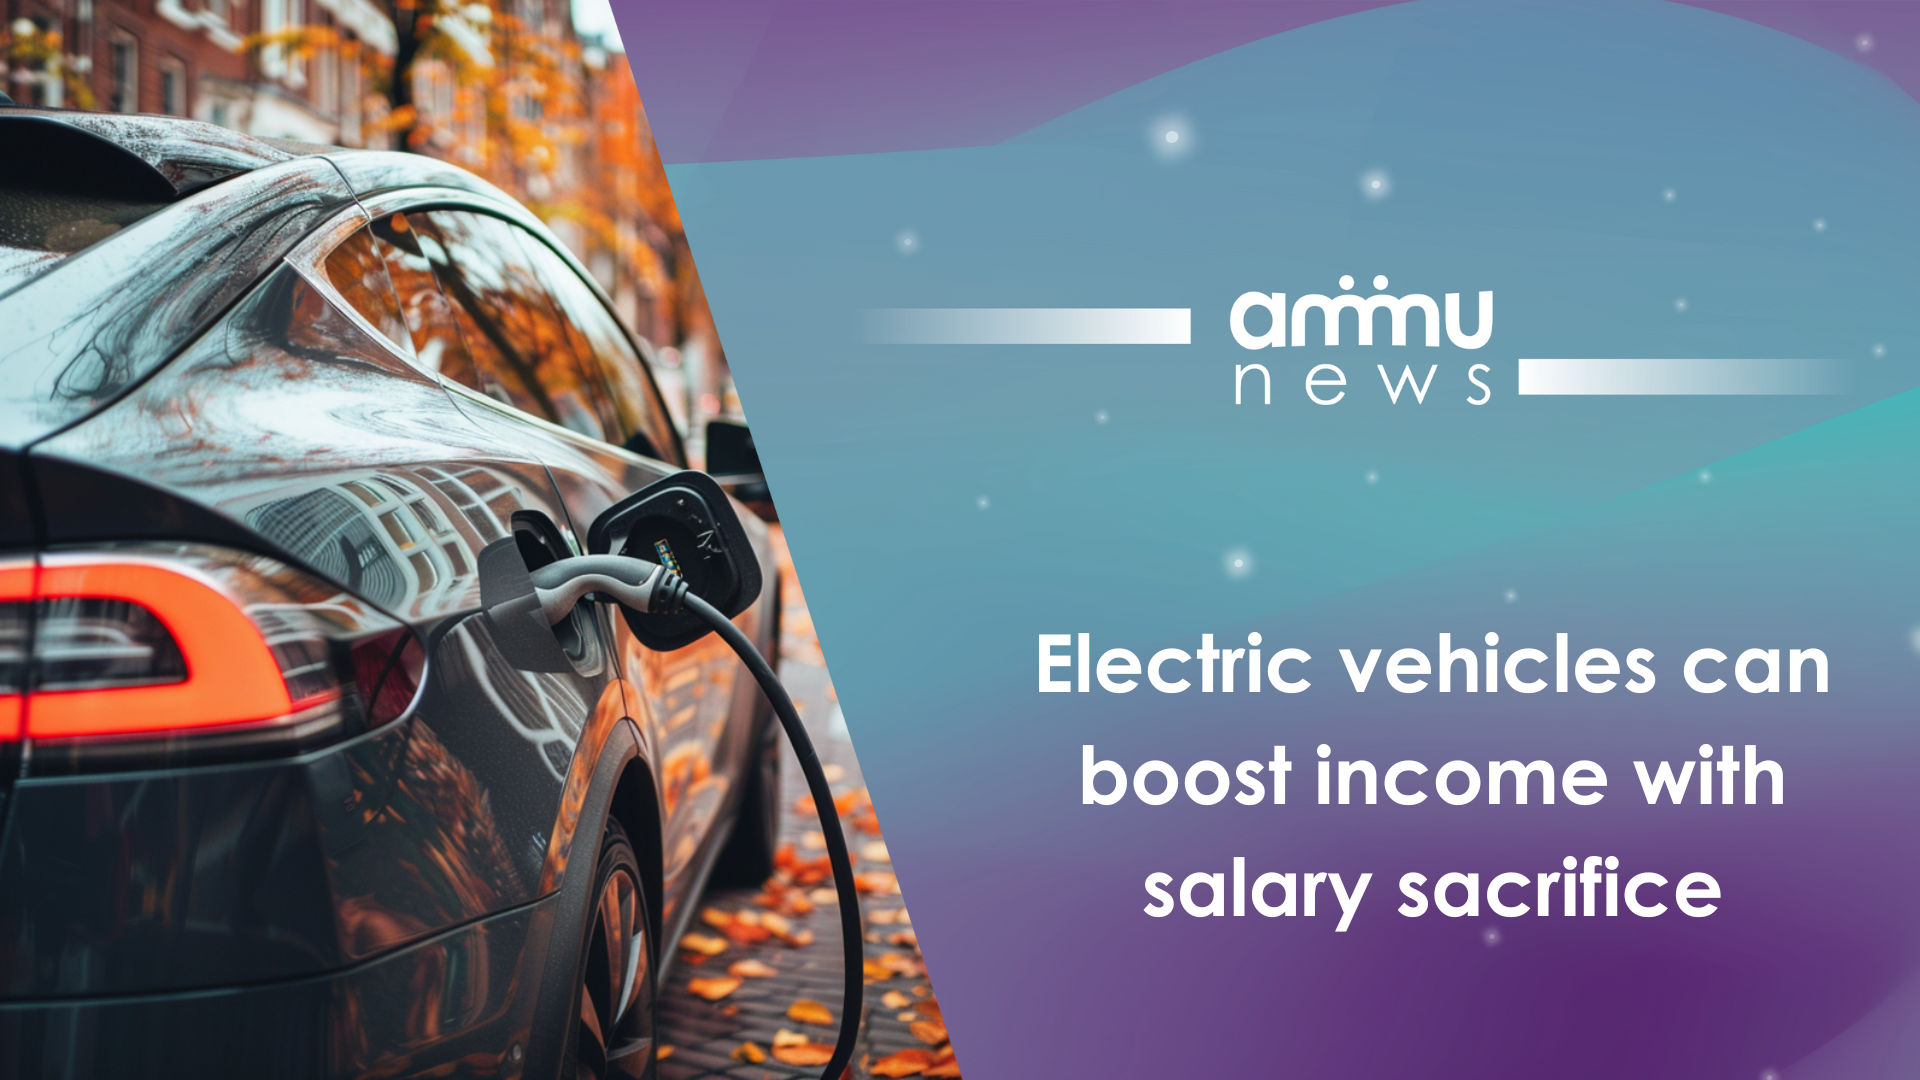 Electric vehicles can boost income with salary sacrifice